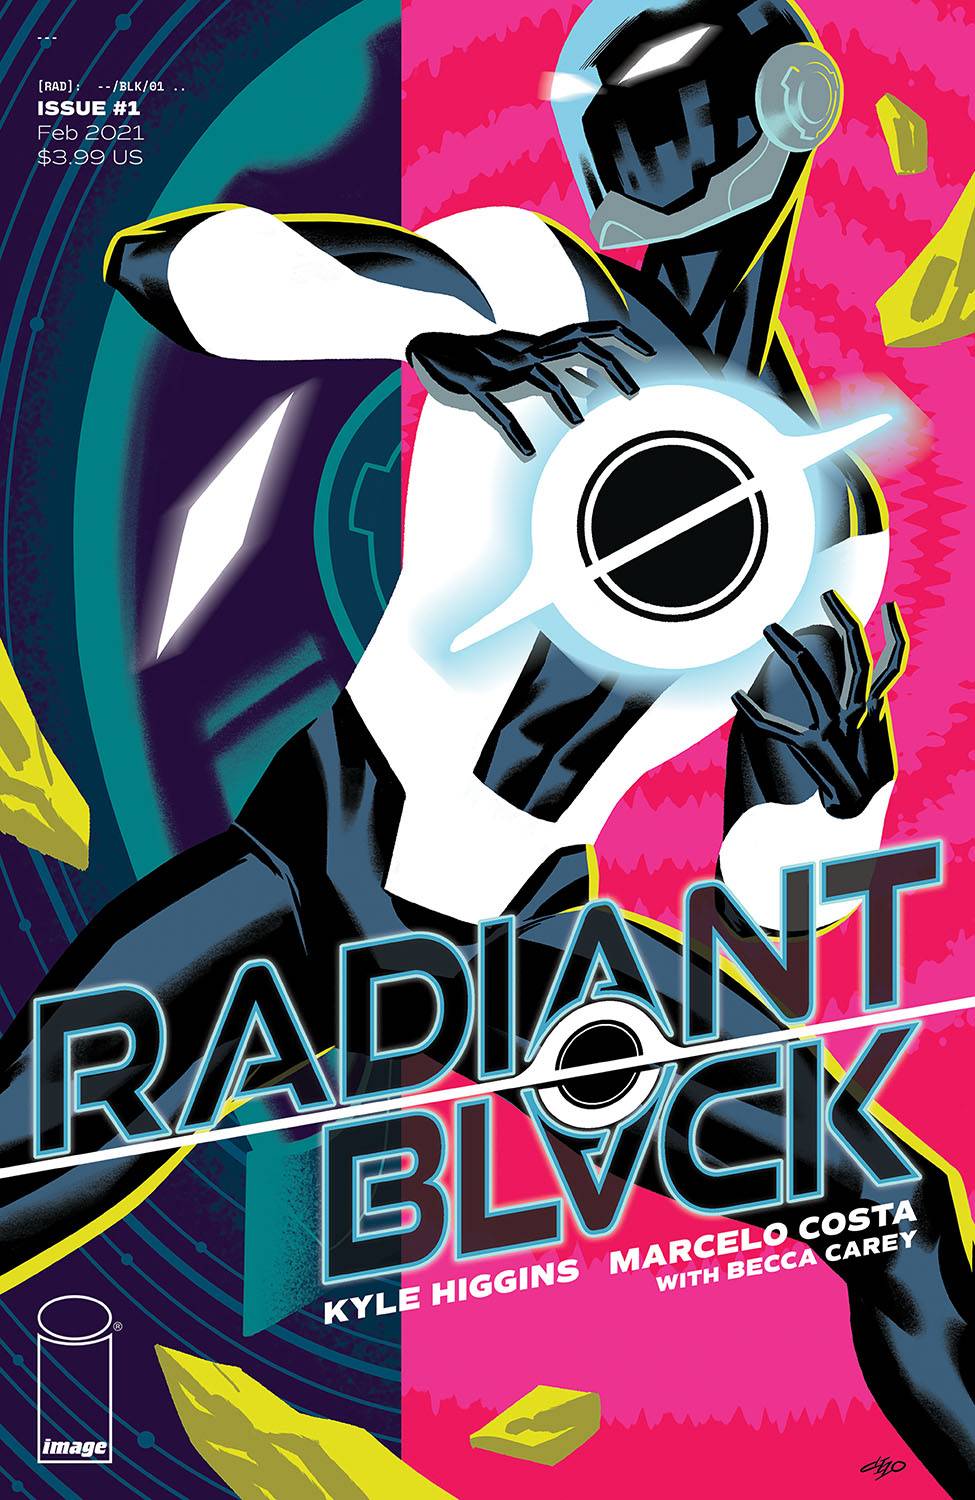 A hero in a black and white full-body suit manipulates a ball of energy between his hands. Radiant Black issue one cover art by Michael Cho. 